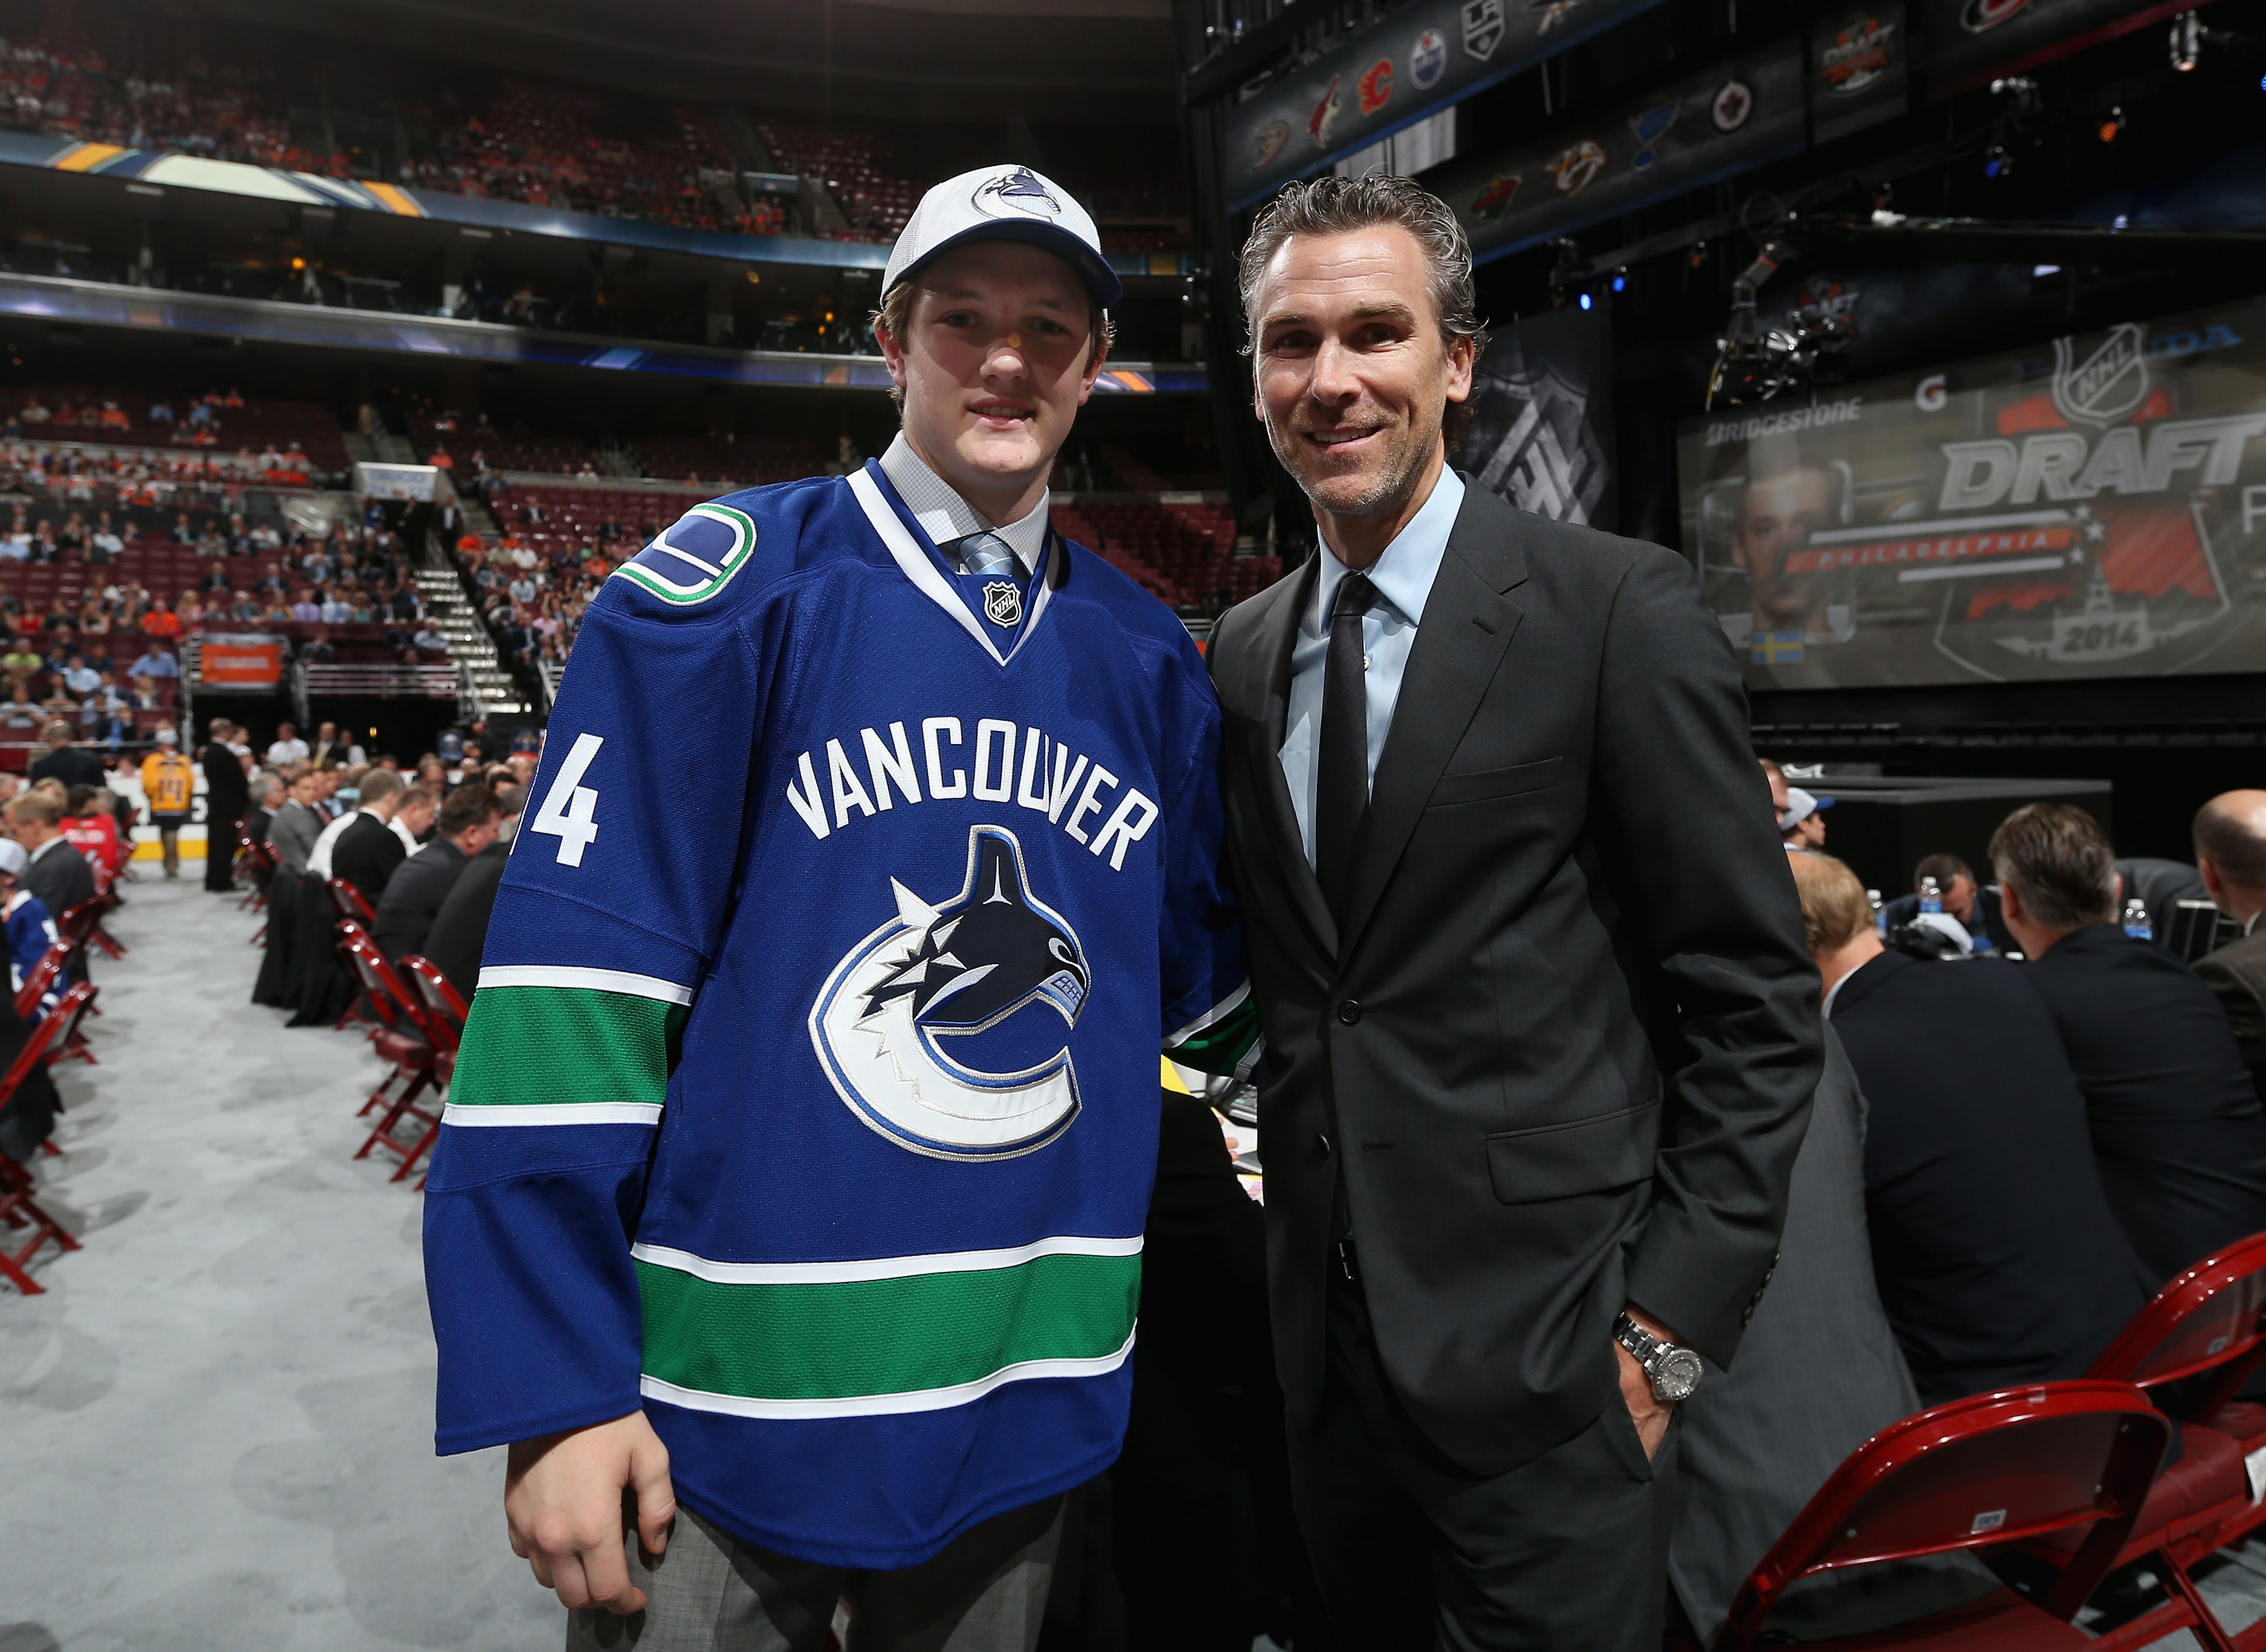 Boston College goalie Thatcher Demko was selected in the 2nd round by Vancouver.